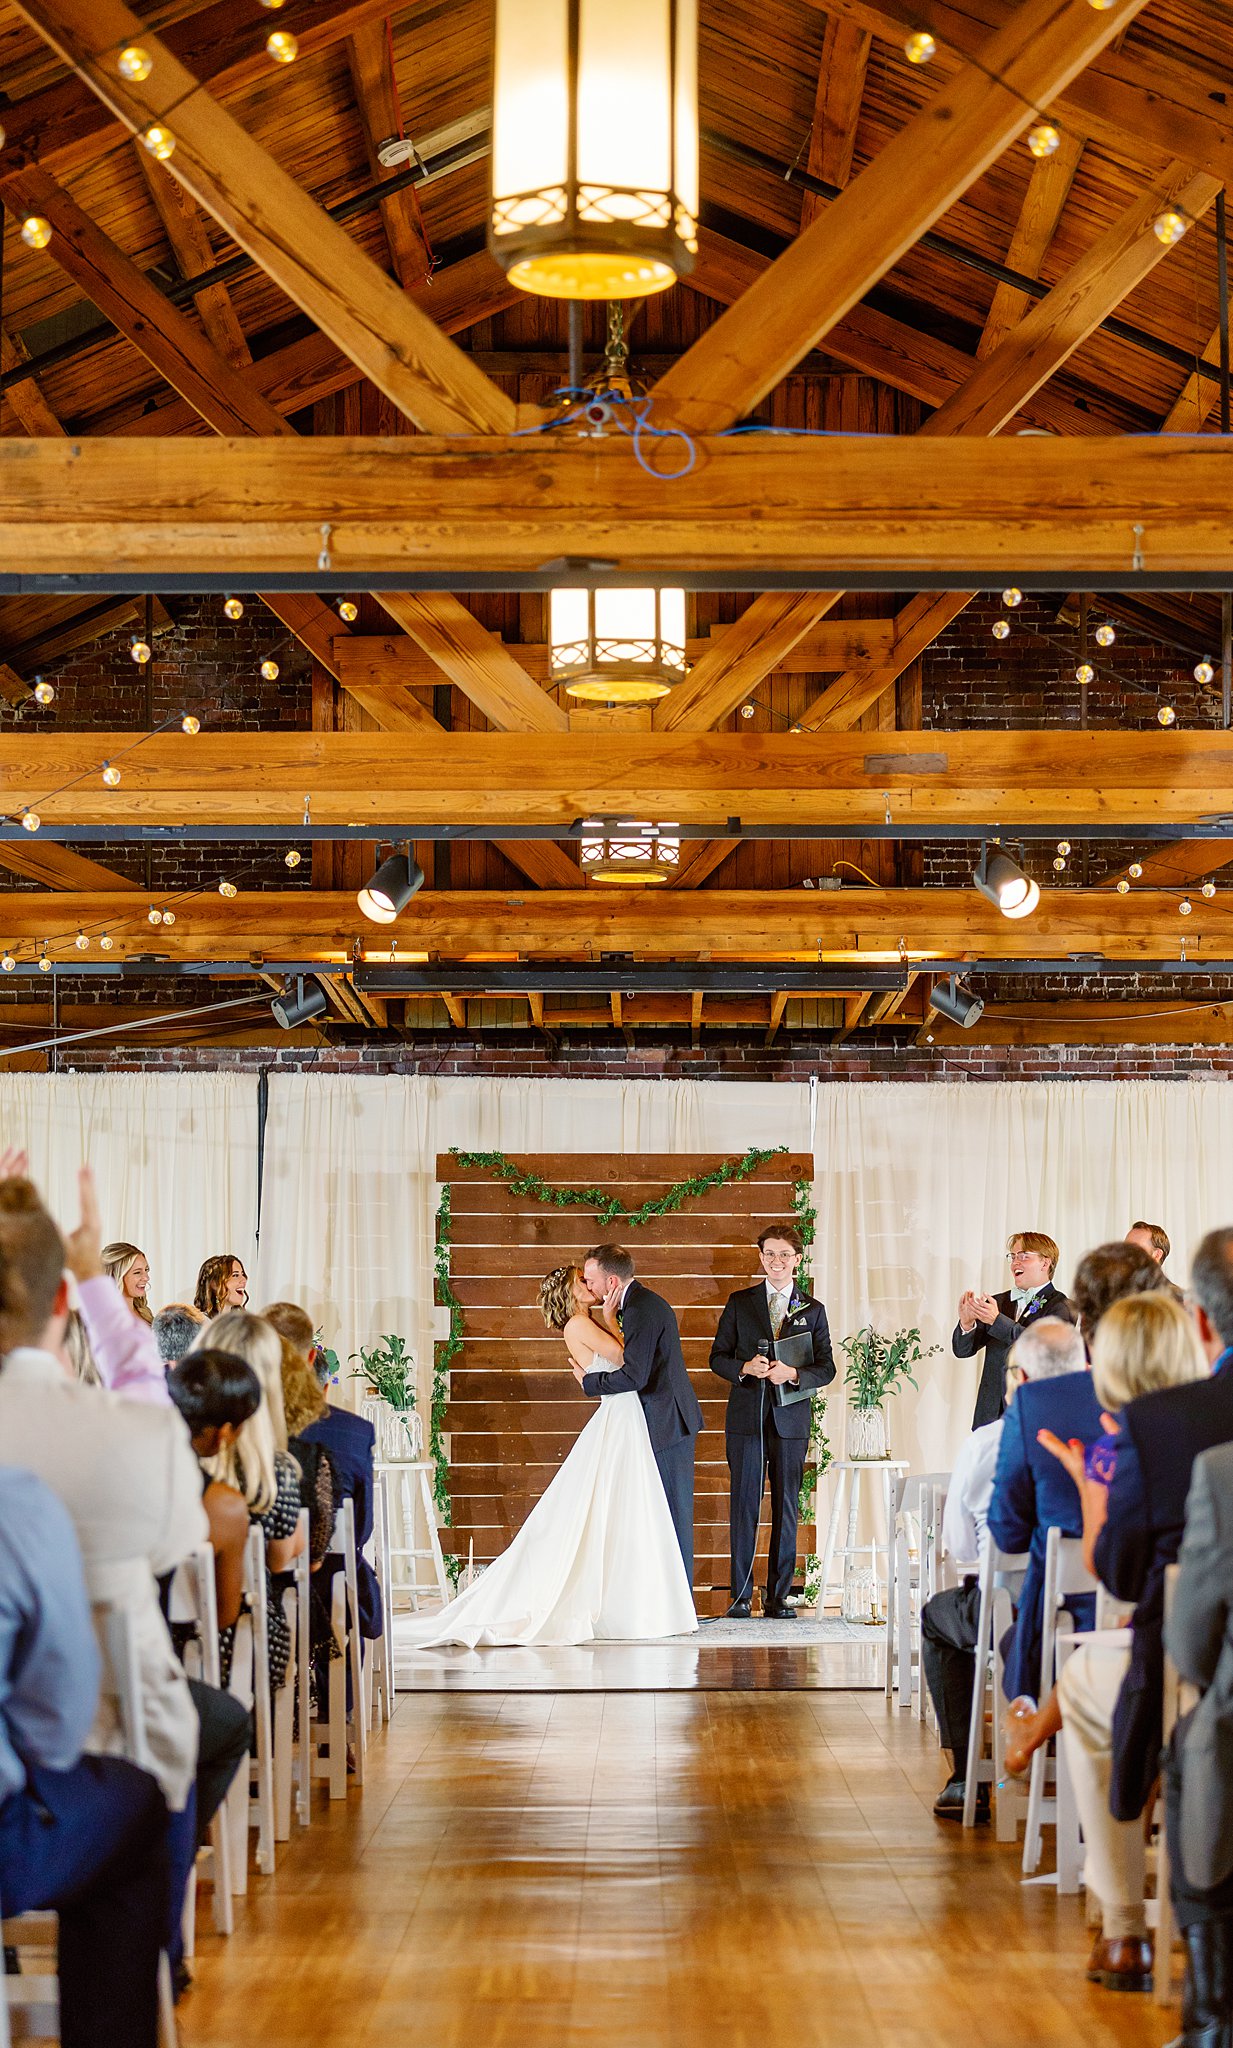 Newlyweds kiss for the first time in a cerermony taking place in a large wooden barn